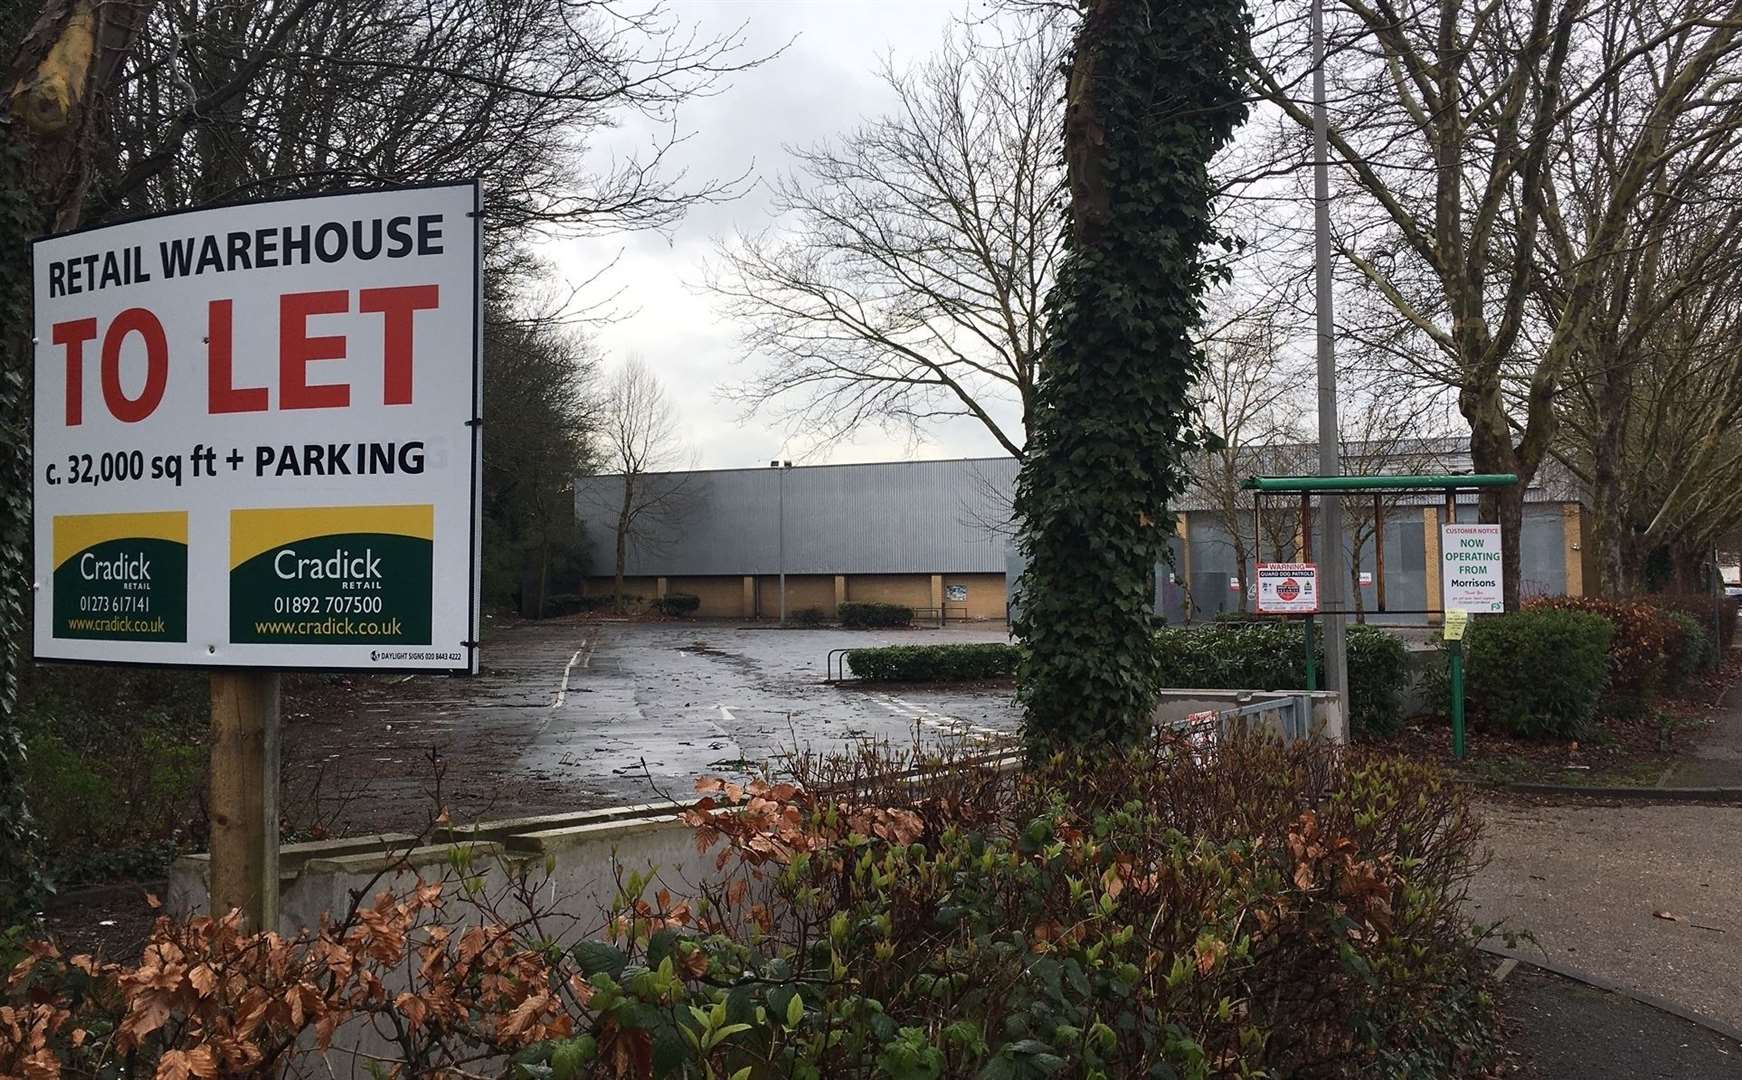 The store has stood empty for two years since Homebase vacated the site